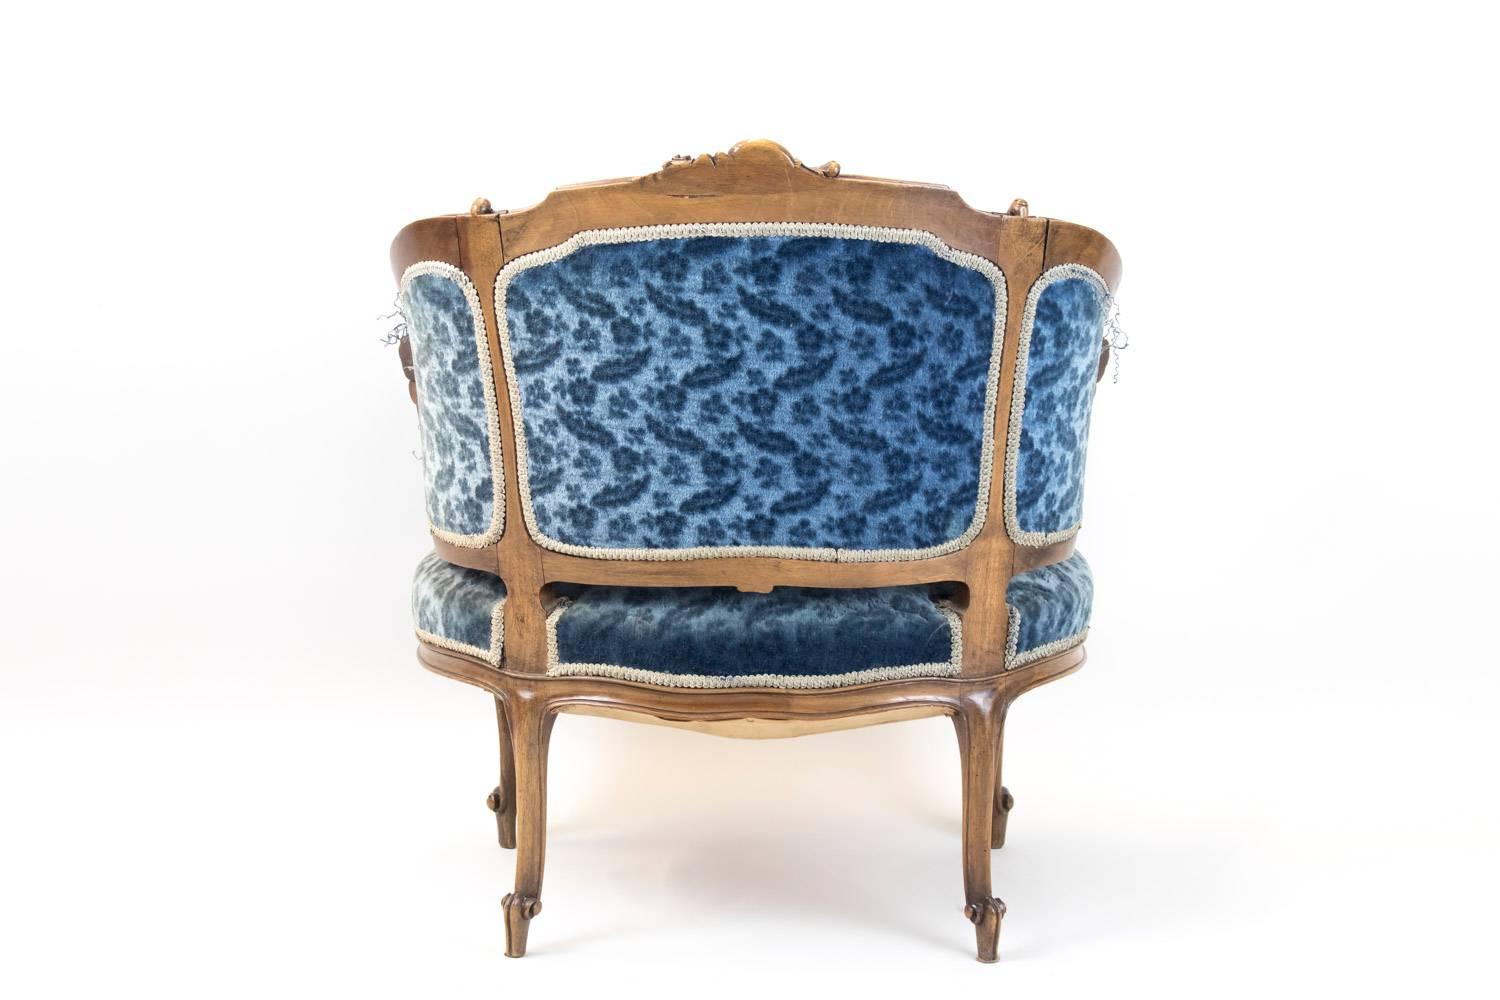 19th Century Pair of Rocaille Style Bergere Armchairs, Blue Velvet Trim, Napoleon III Period